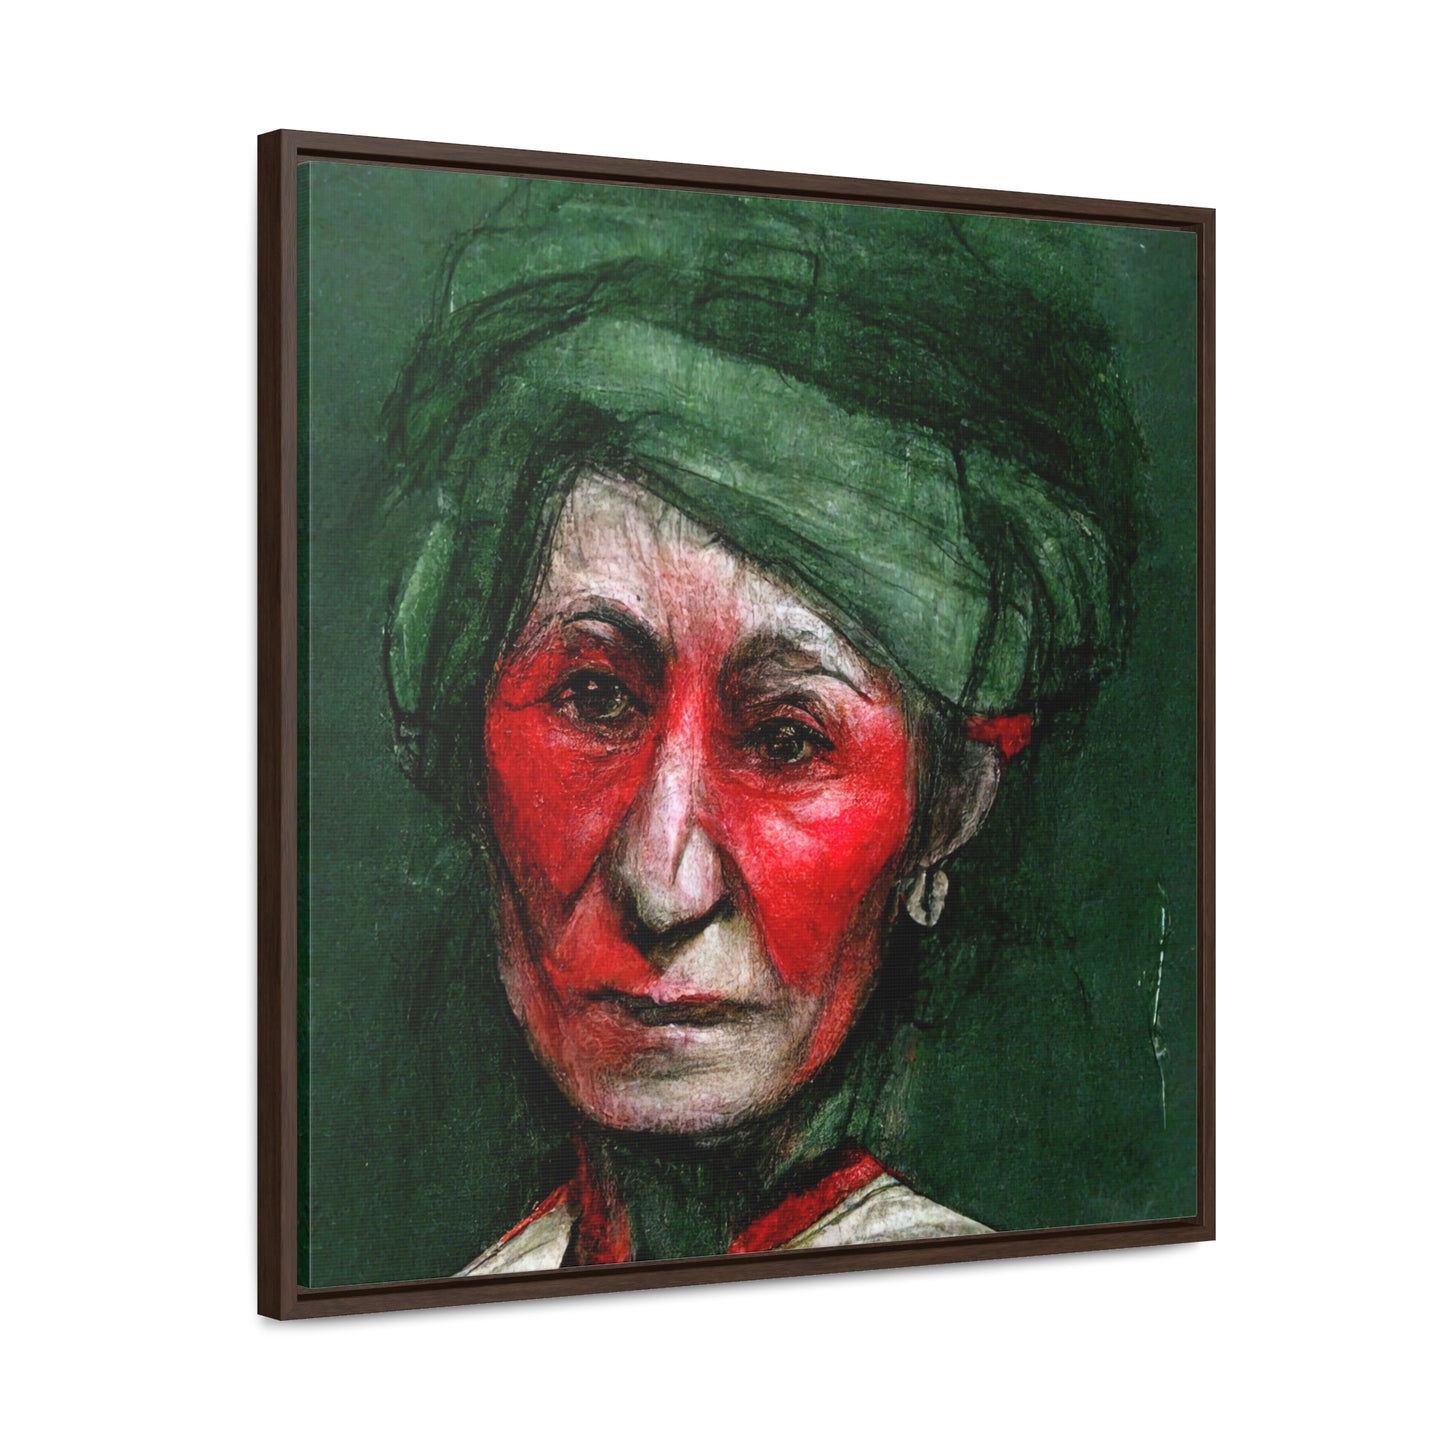 Loneliness Green Red 43, Valentinii, Gallery Canvas Wraps, Square Frame